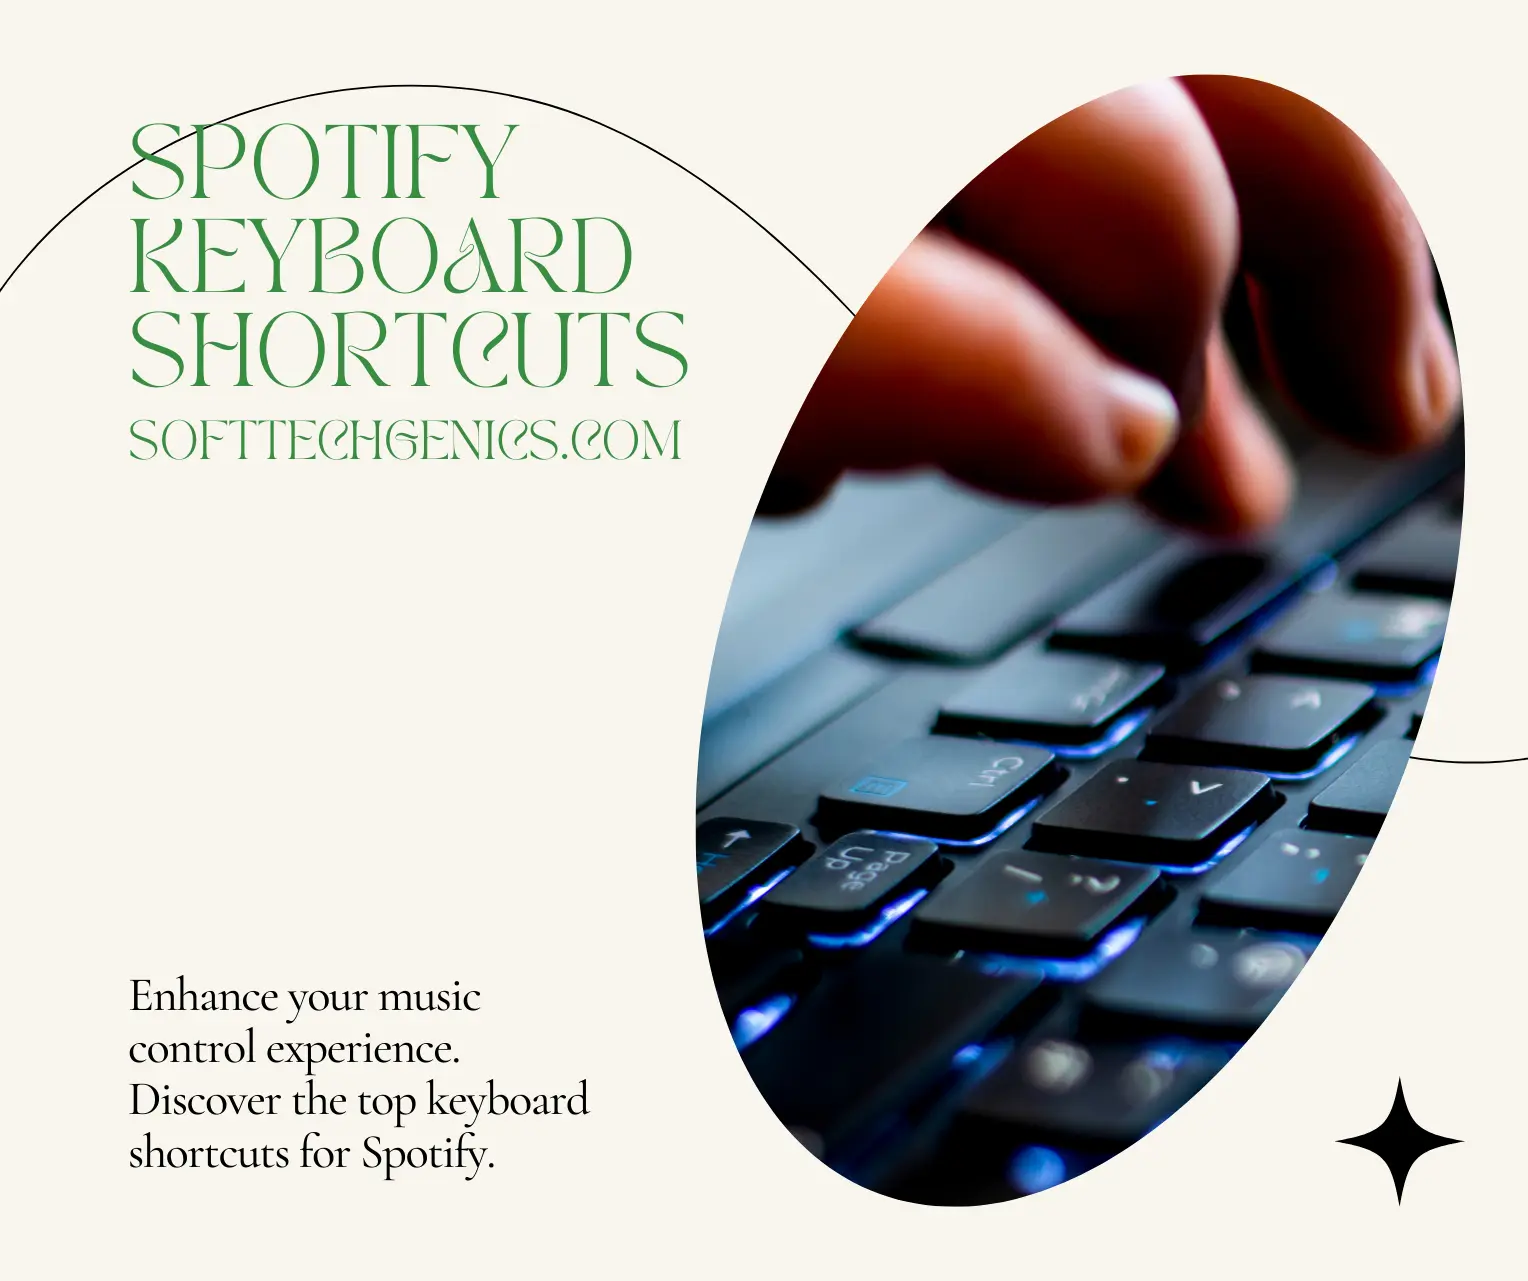 Spotify Keyboard Shortcuts: Enhance Your Music Experience